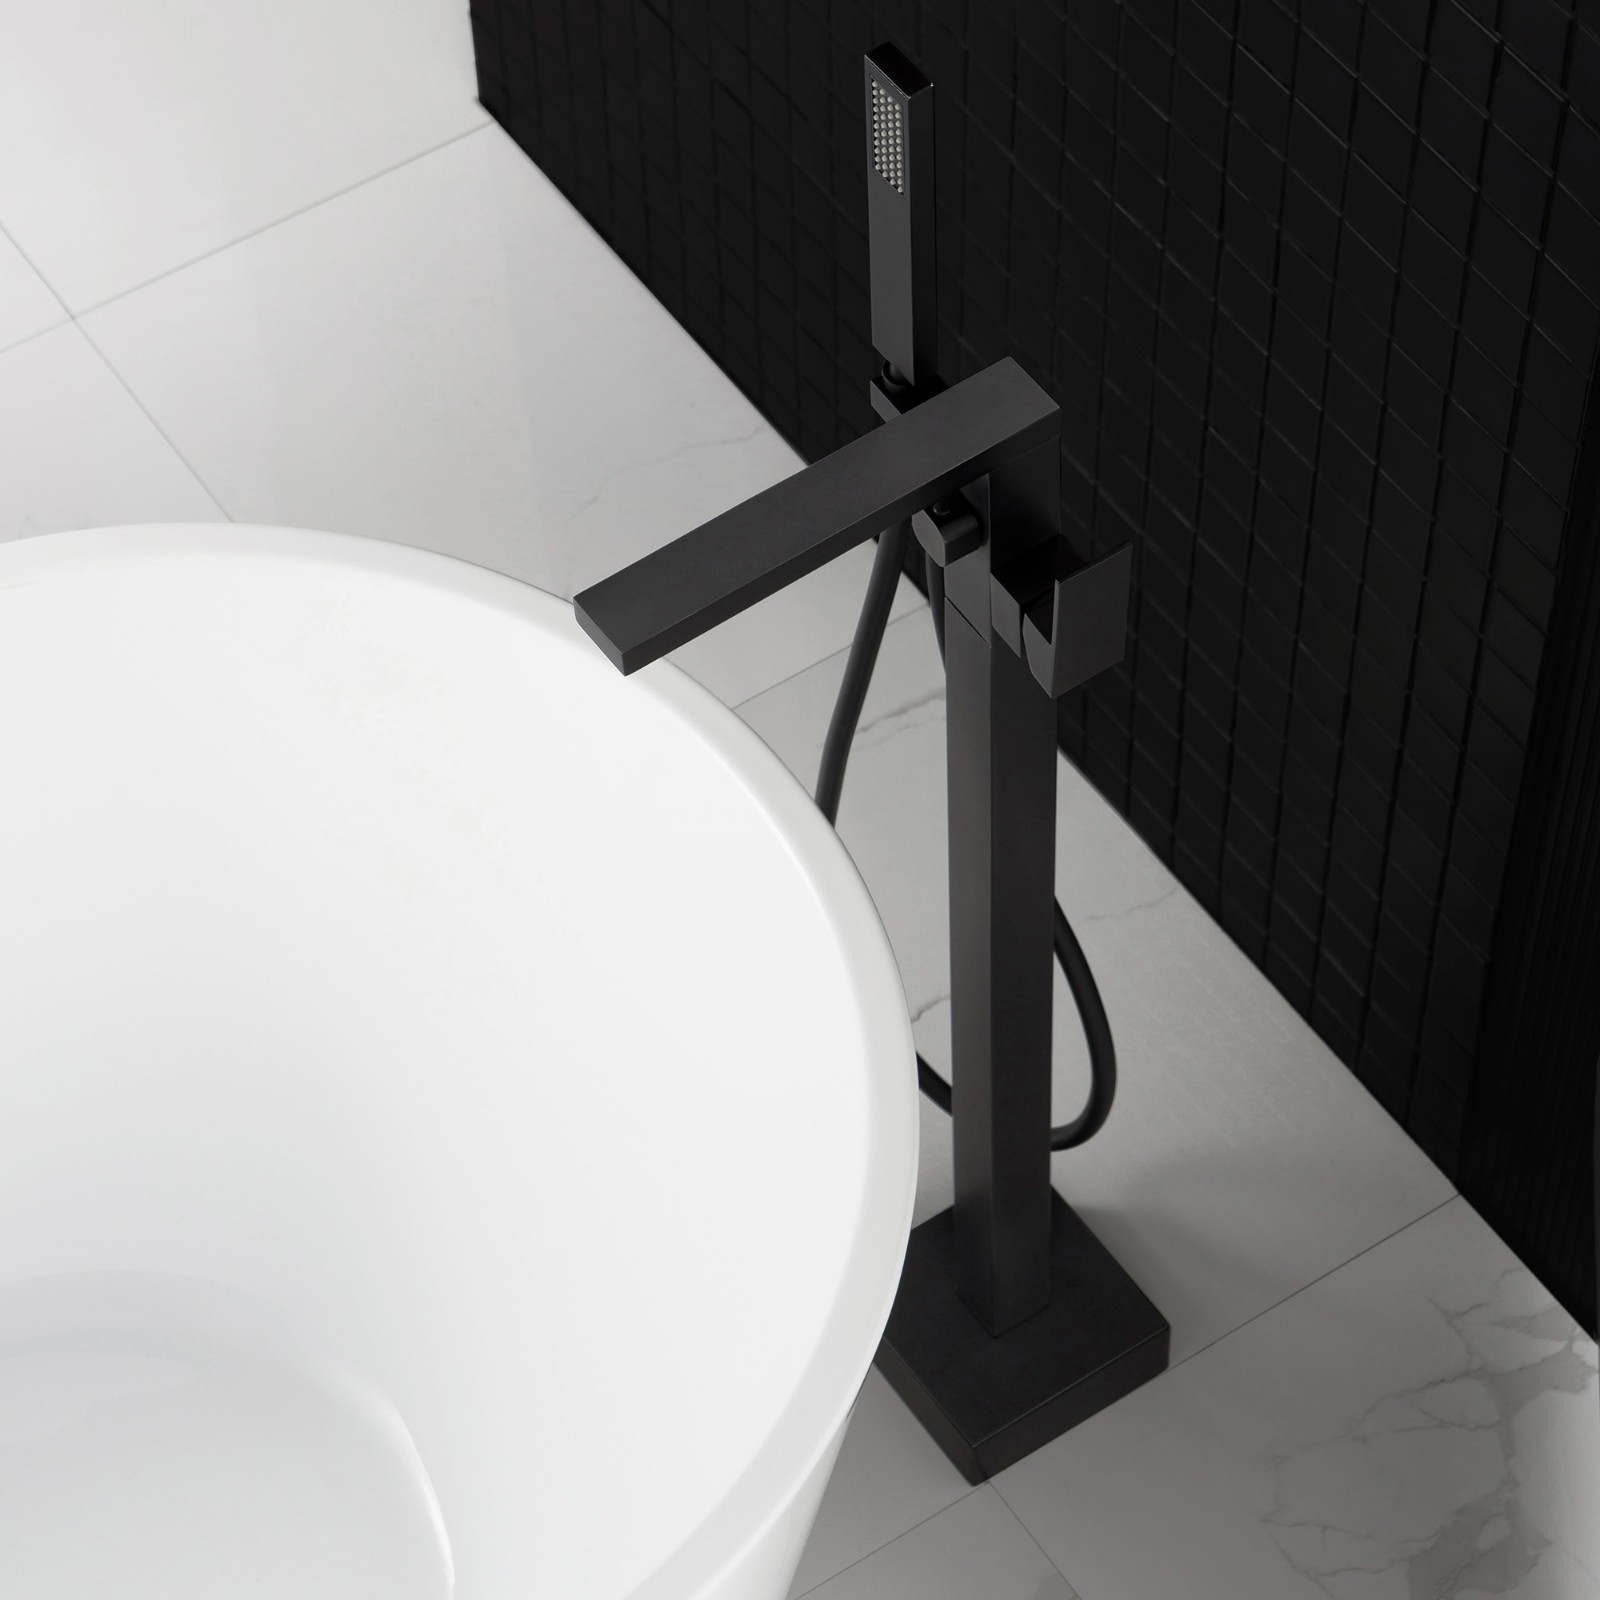  WOODBRIDGE F0009BL Contemporary Single Handle Floor Mount Freestanding Tub Filler Faucet with Hand shower in Matte Black Finish._4213